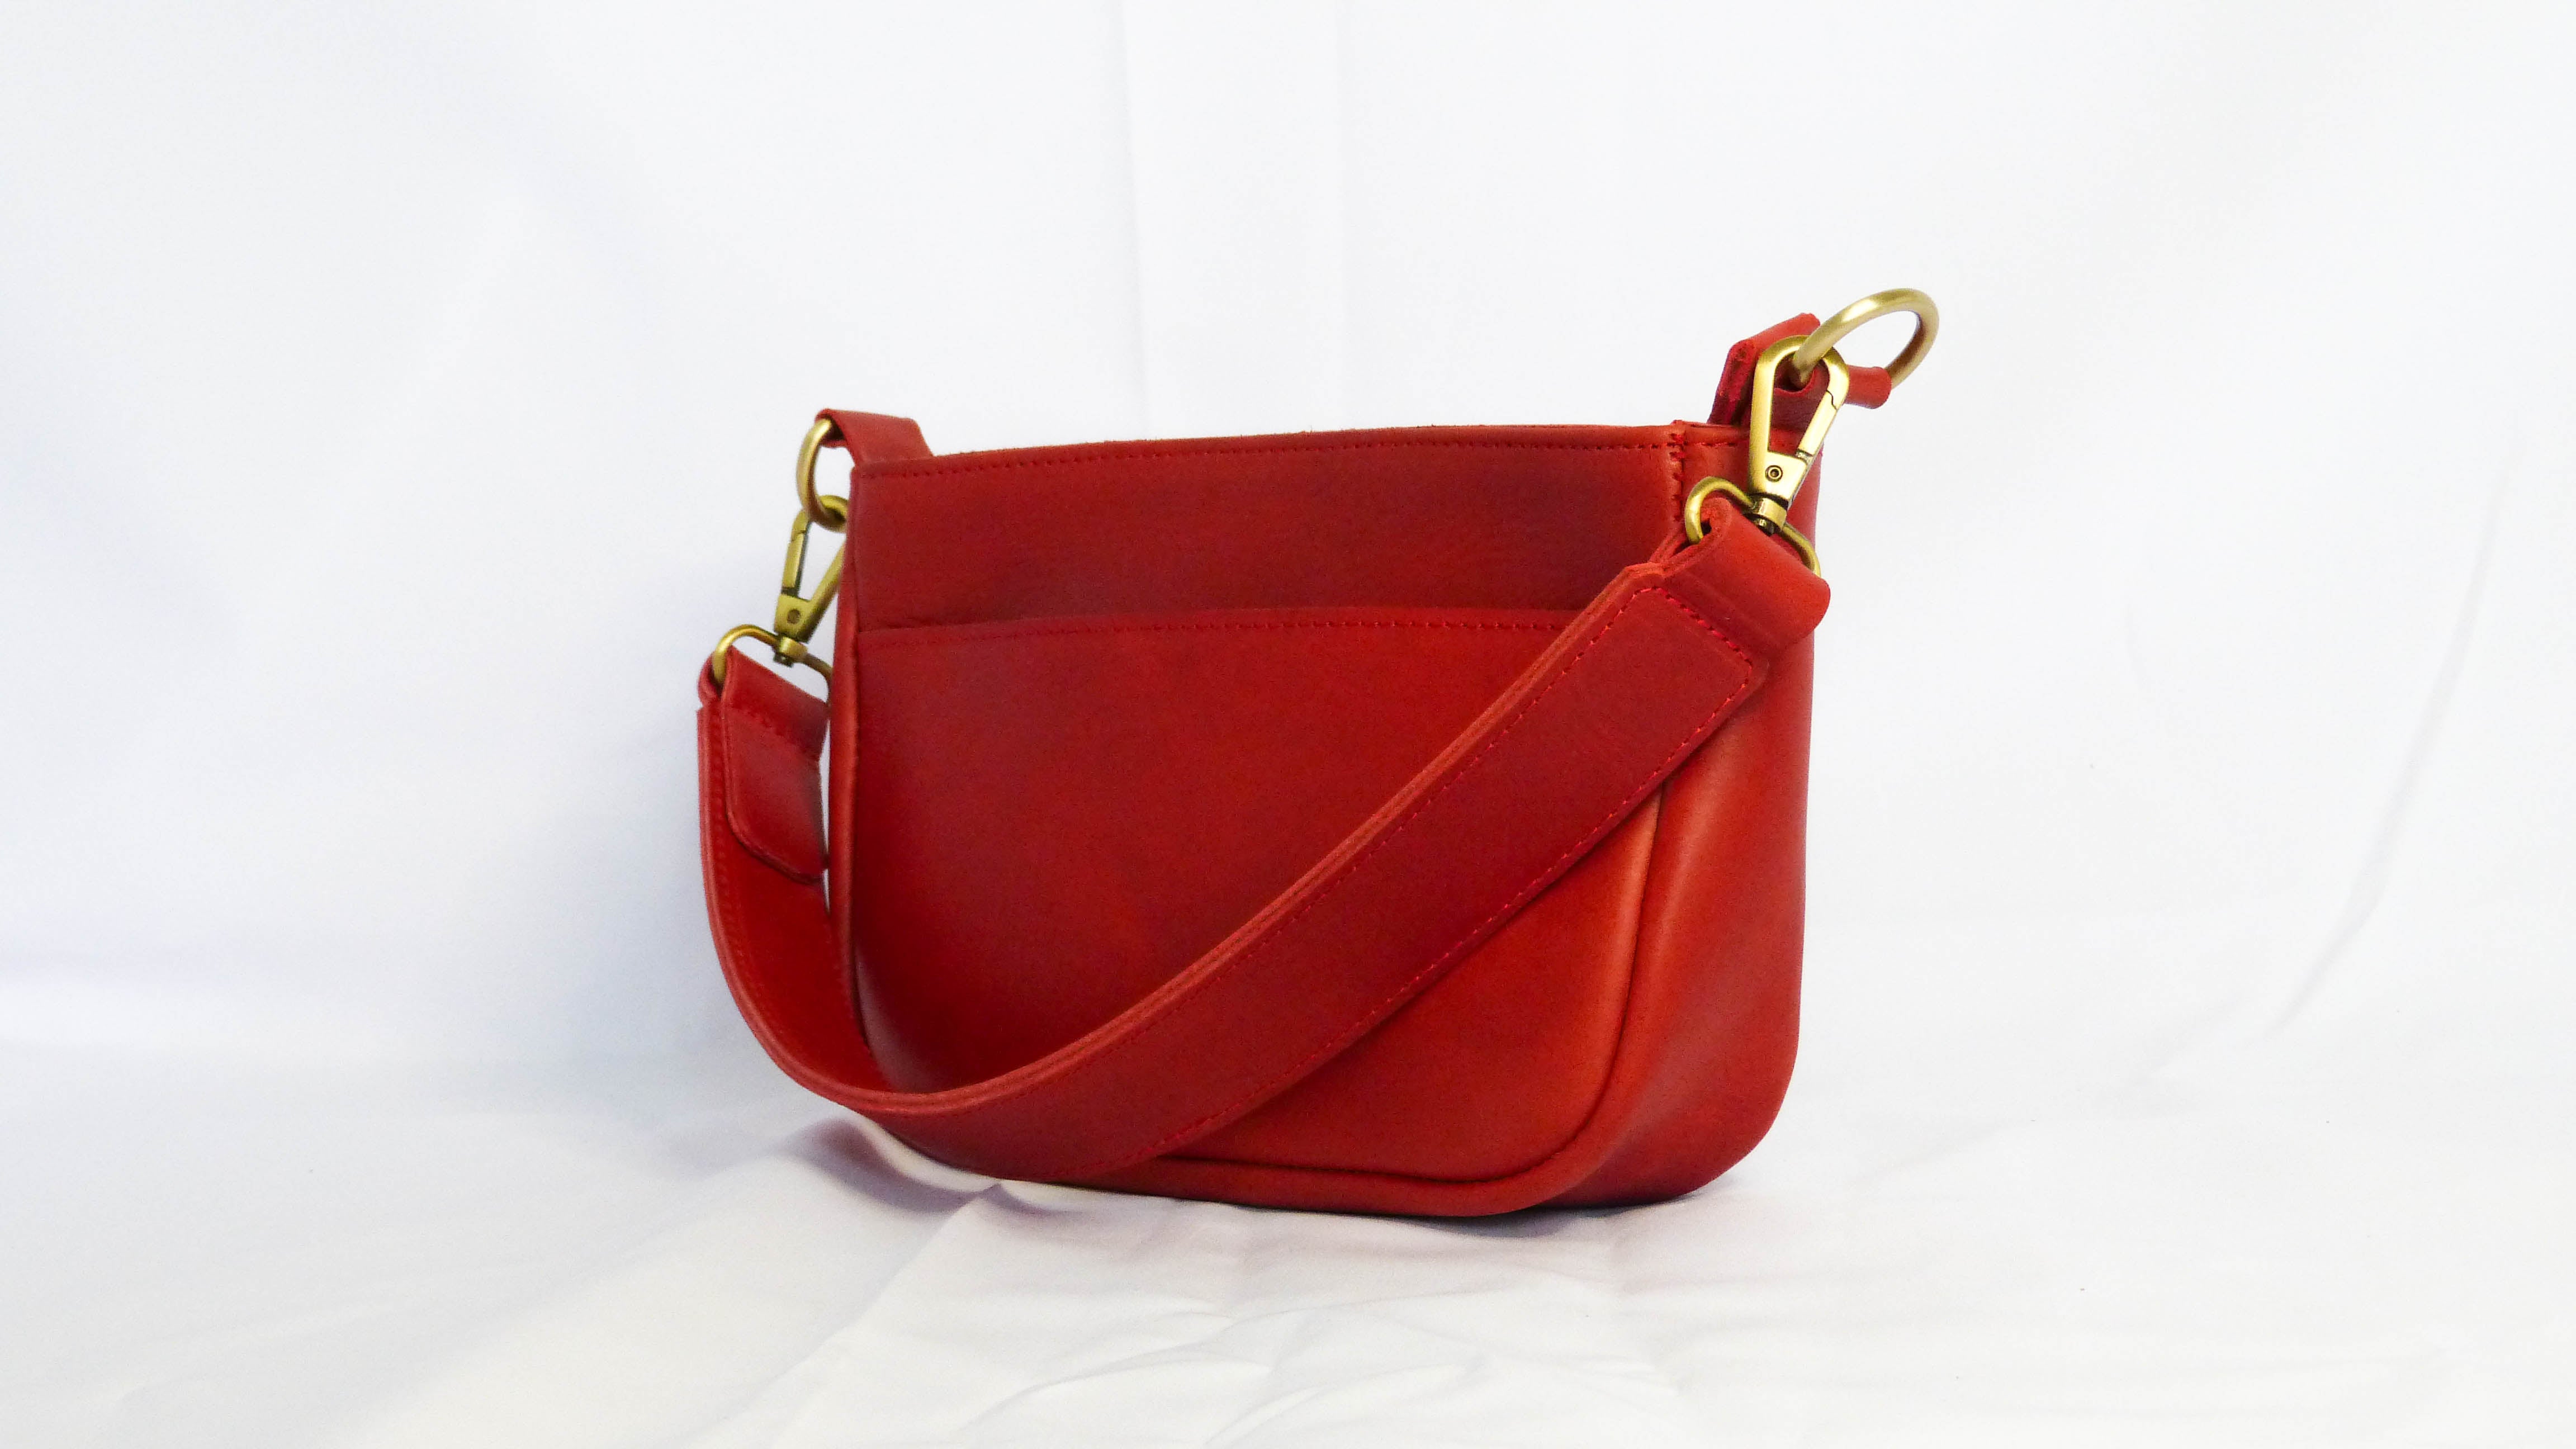 A red leather purse with a removable shoulder strap, zippered top, inside zipper pocket, and outside phone pocket. Handmade by Ethiopian artisans for Madeline Parks Designs.